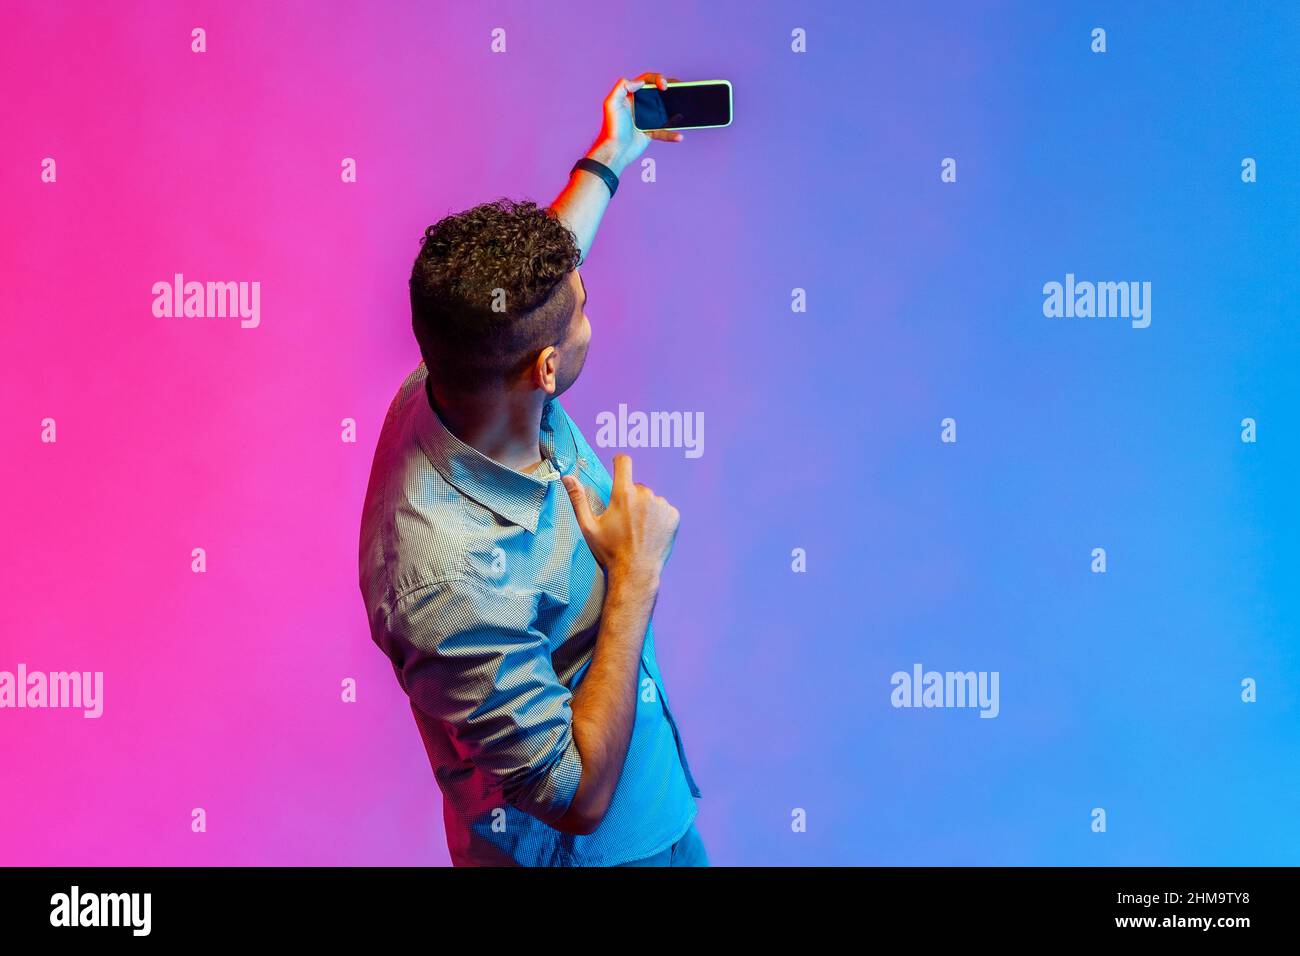 Back side of man in shirt taking selfie or broadcasting livestream, holding smart phone with blank screen, online conversation. Indoor studio shot isolated on colorful neon light background. Stock Photo